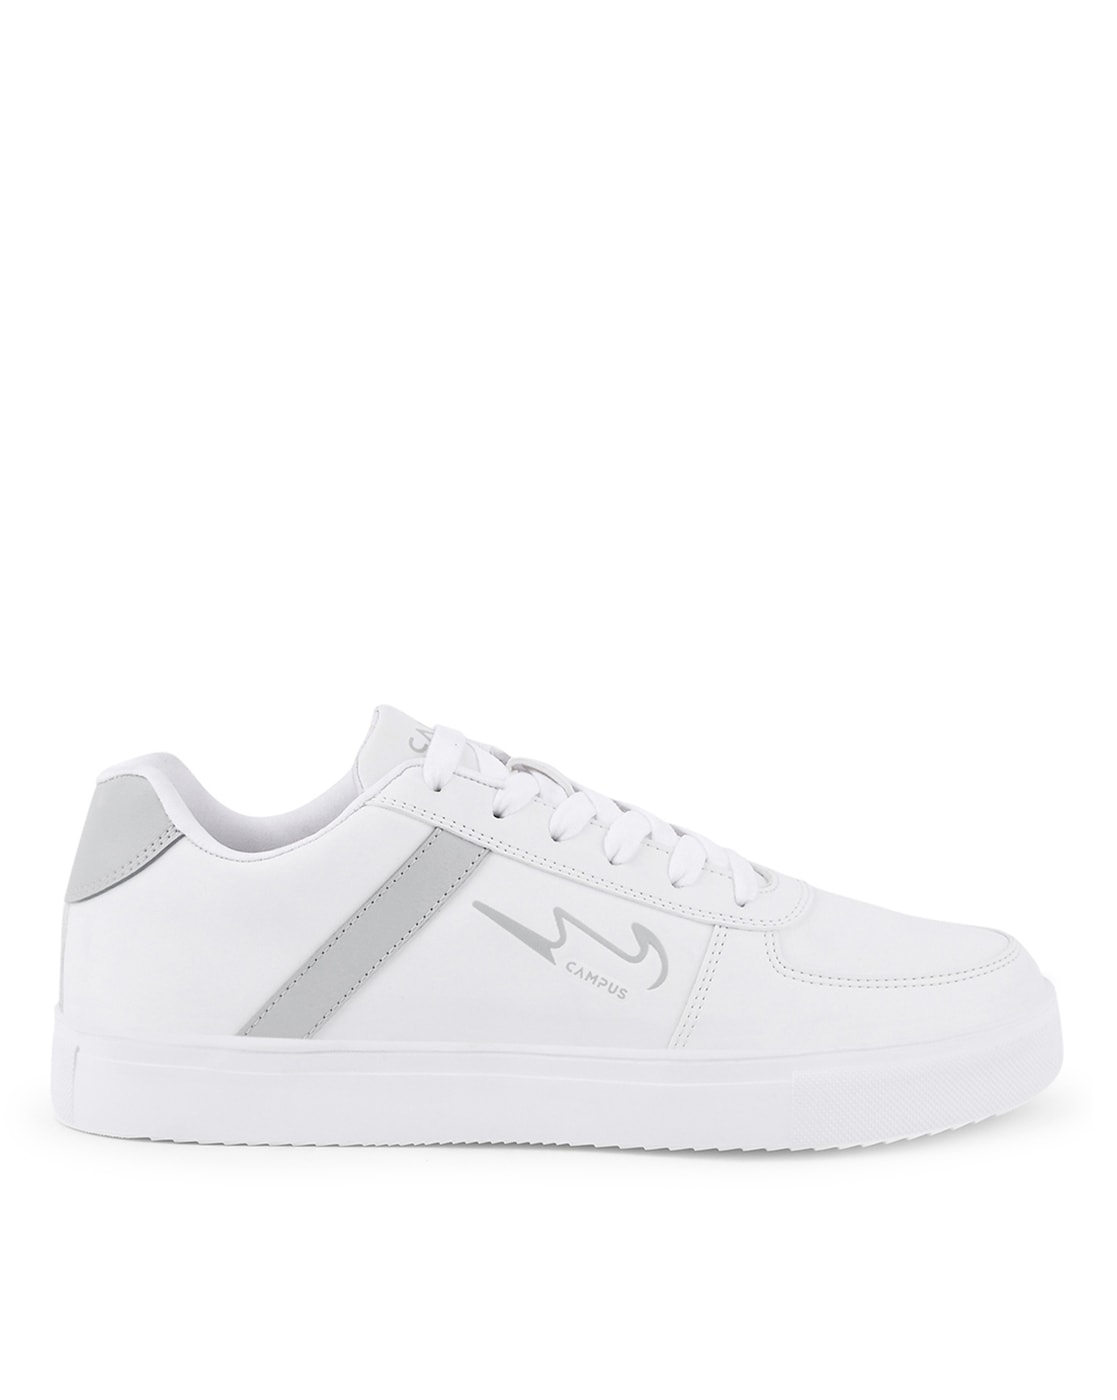 Top more than 155 campus white sneakers best